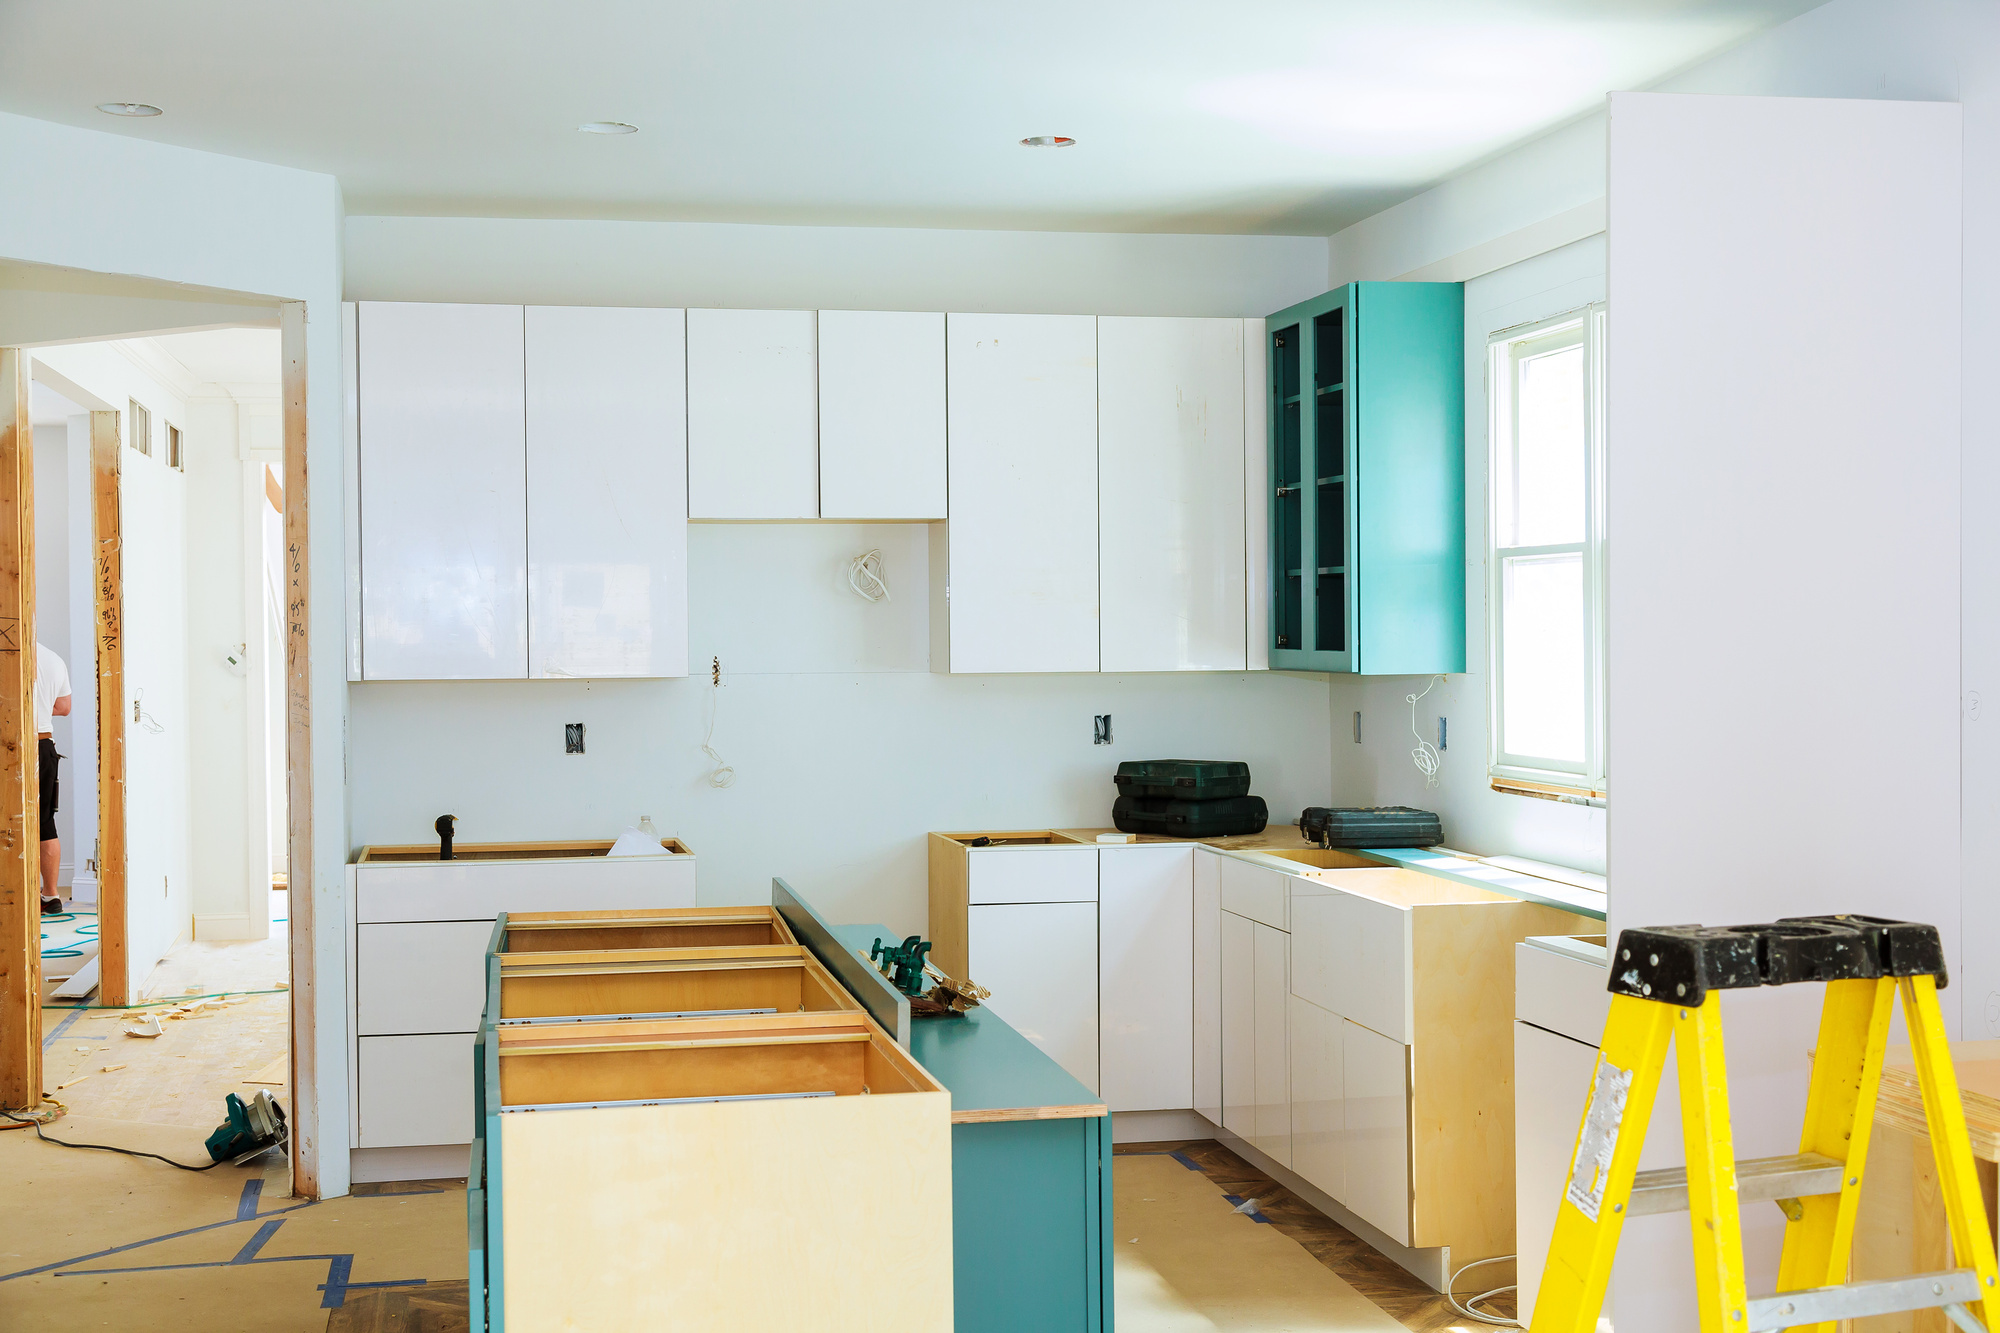 When it comes to renovating a kitchen, there are several things you should remember. Check out this guide for our greatest tips.